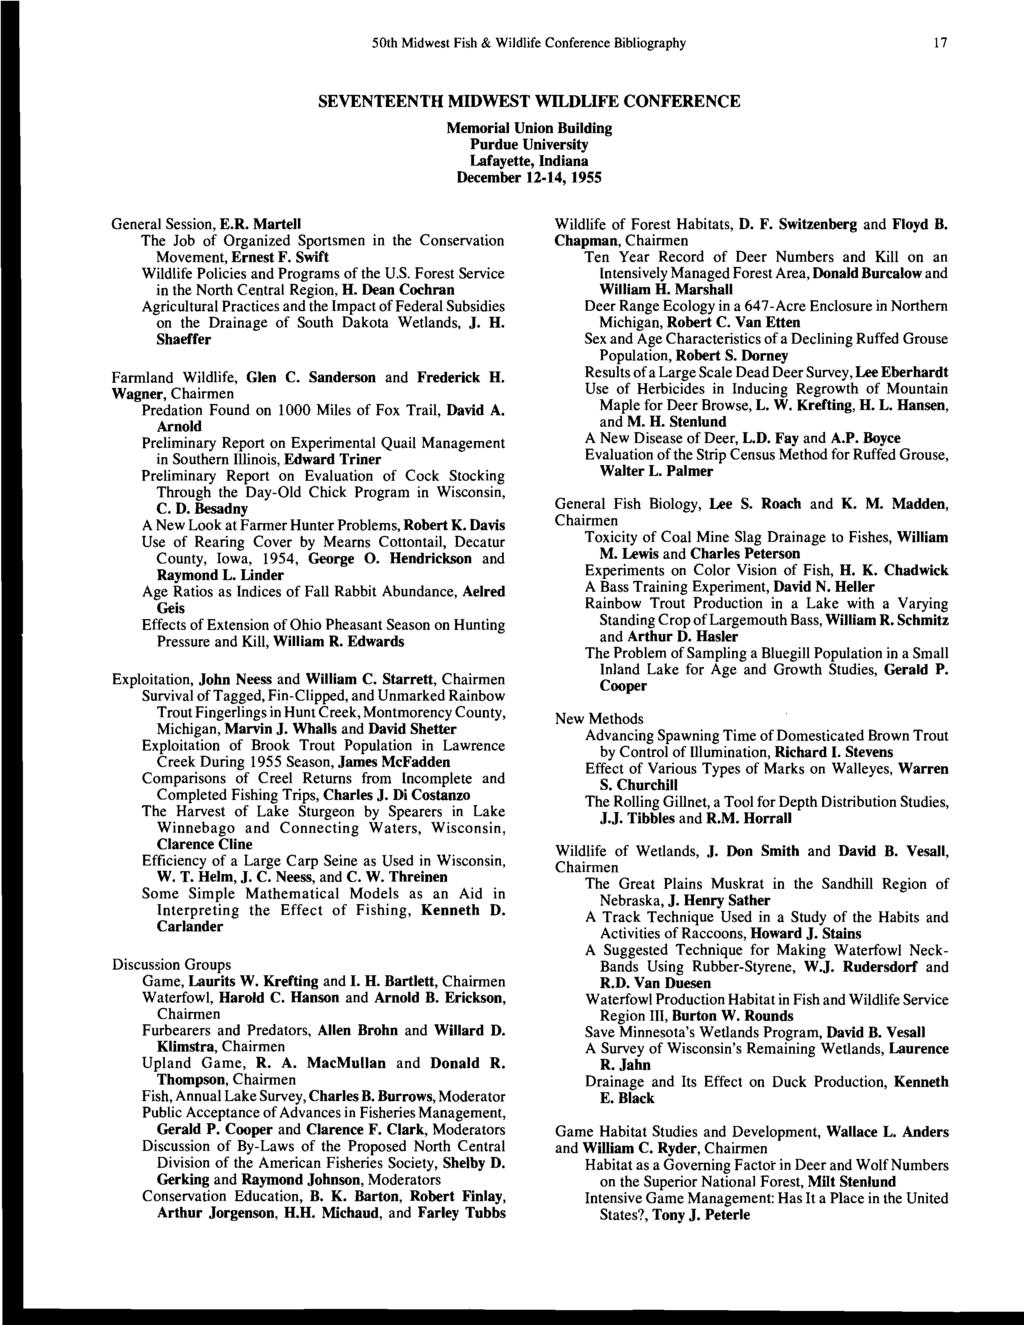 50th Midwest Fish & Wildlife Conference Bibliography 17 SEVENTEENTH MIDWEST WILDLIFE CONFERENCE Memorial Union Building Purdue University Lafayette, Indiana December 12.14, 1955 General Session, E.R. Martell The Job of Organized Sportsmen in the Conservation Movement, Ernest F.